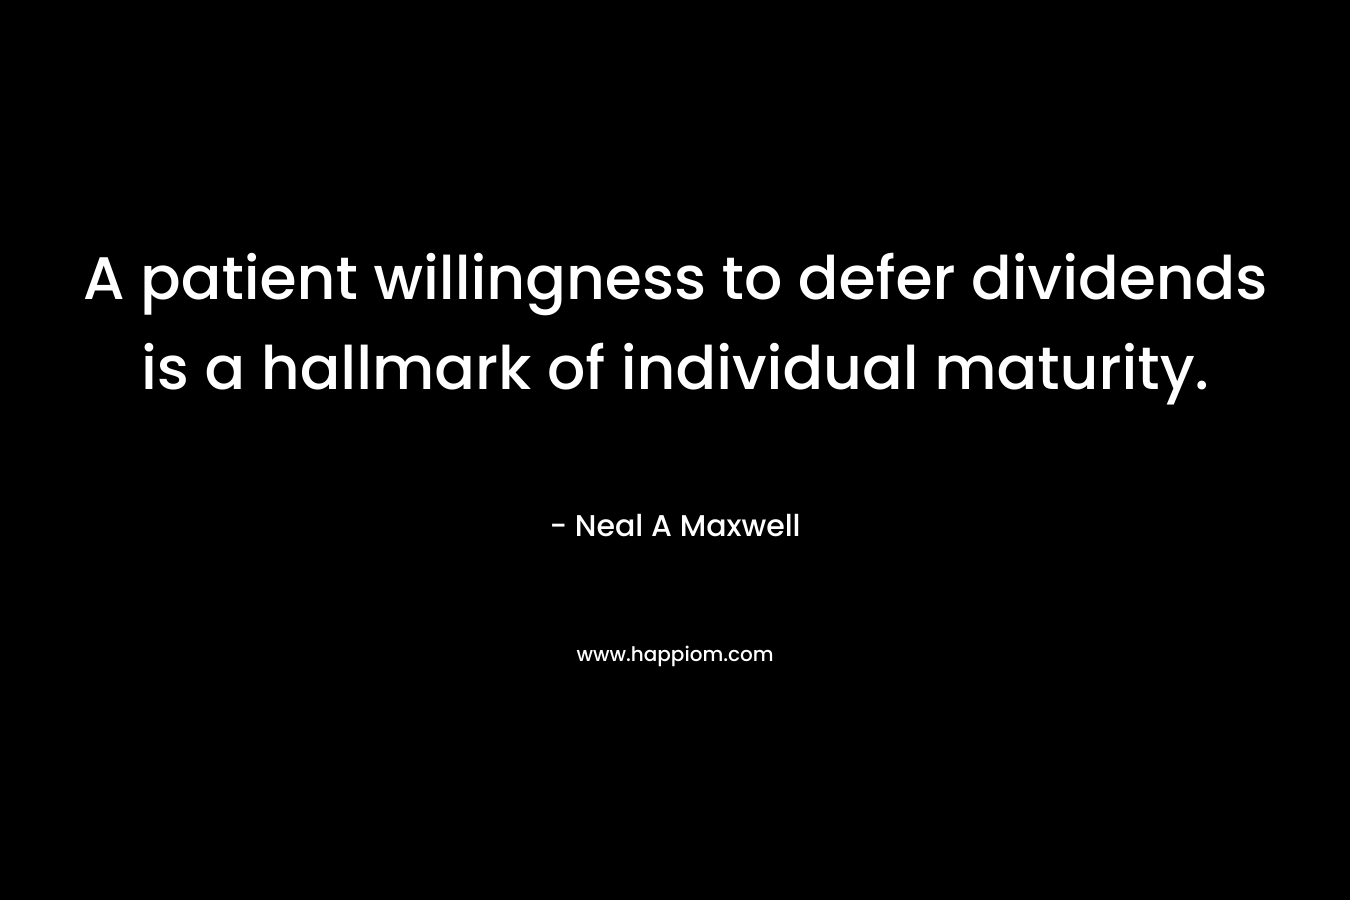 A patient willingness to defer dividends is a hallmark of individual maturity.